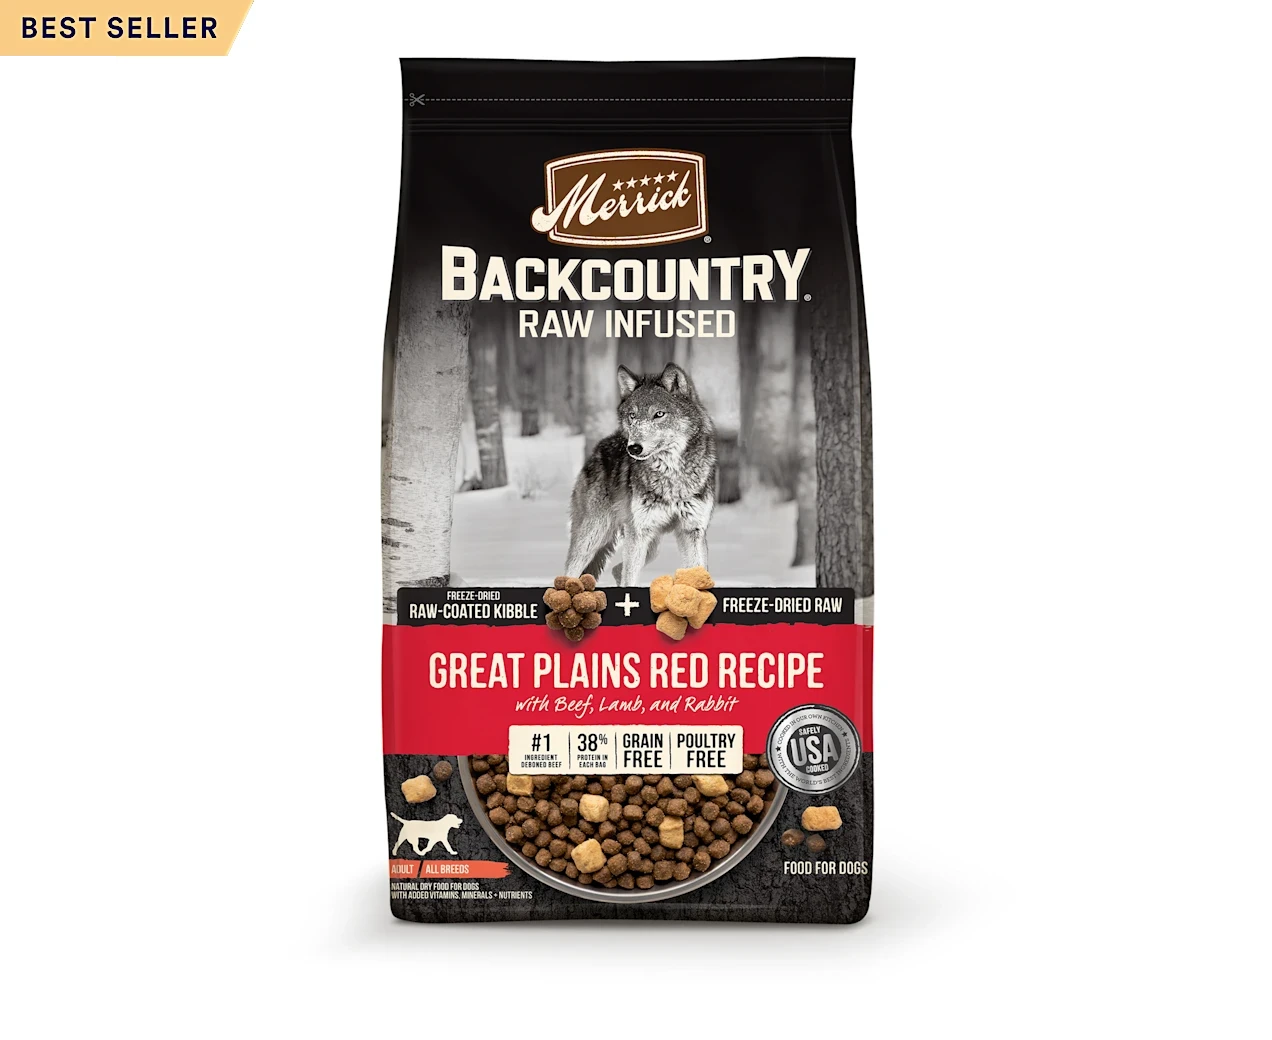 Merrick Backcountry Freeze Dried Raw Infused Grain Free Great Plains Red Recipe Dry Dog Food, 20 lbs.